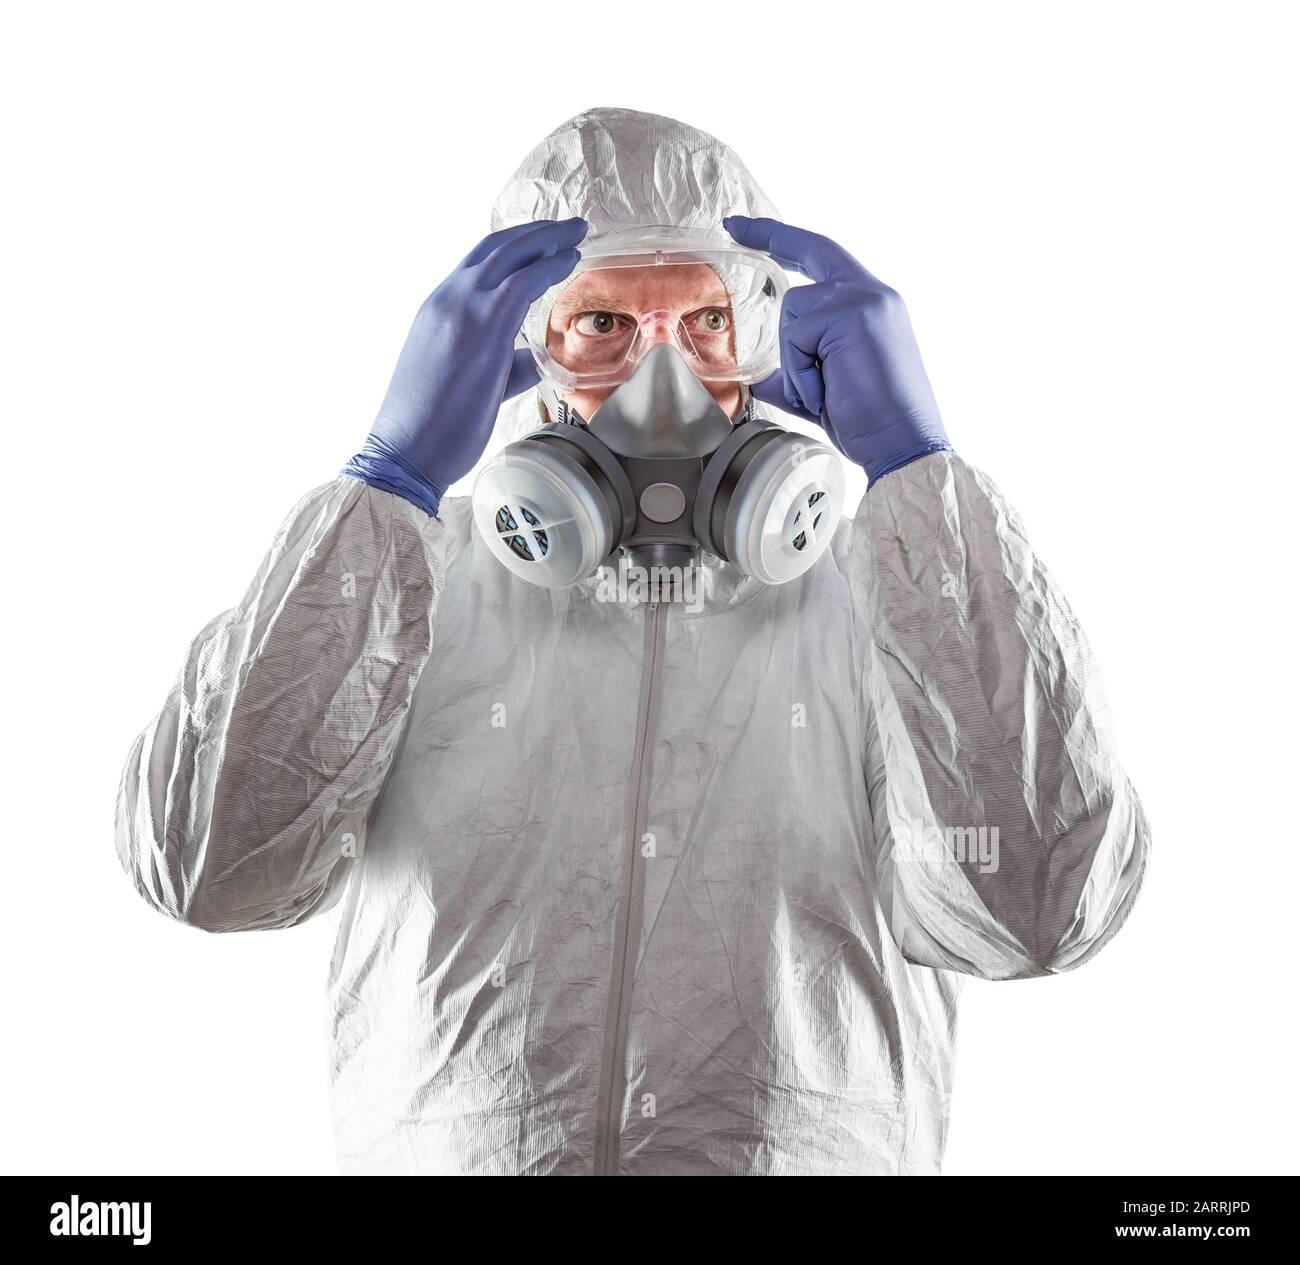 Man Wearing Hazmat Suit, Goggles and Gas Mask Isolated On White. Stock Photo